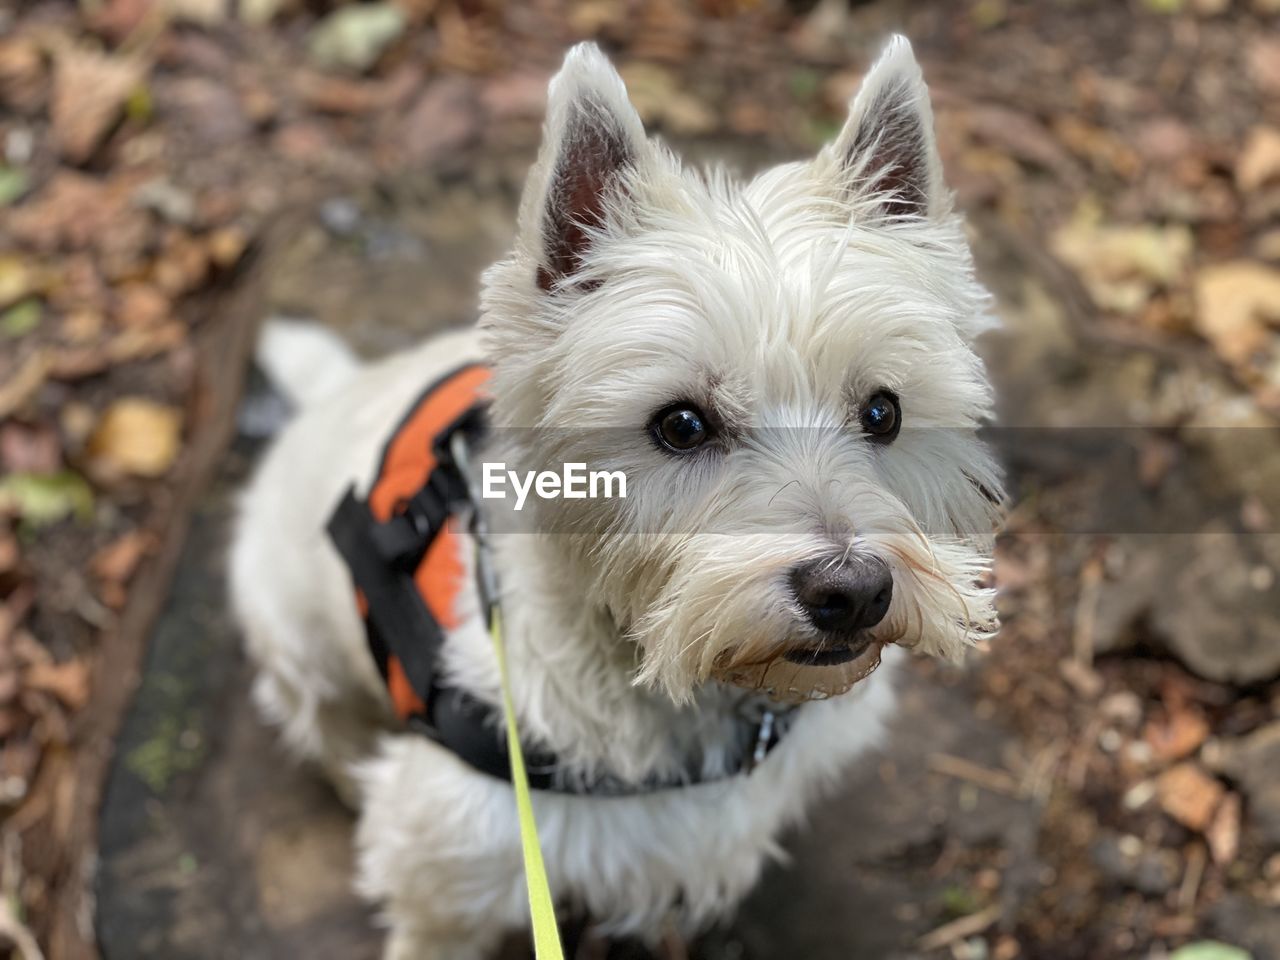 Westie in a wood looking at the camera 